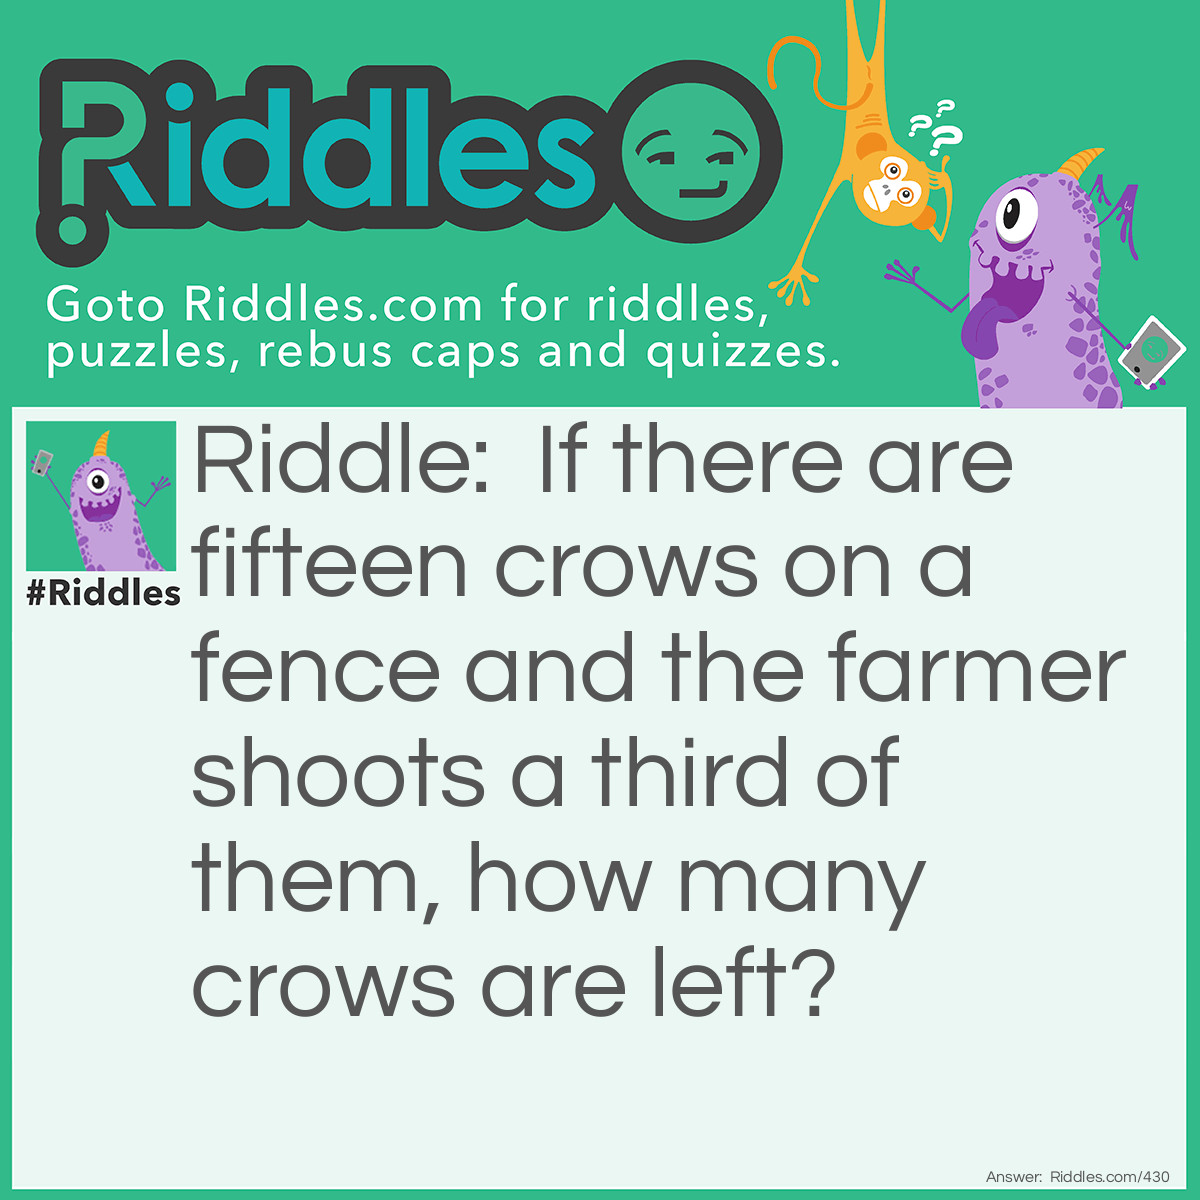 Riddle: If there are fifteen crows on a fence and the farmer shoots a third of them, how many crows are left? Answer: None. The rest of the crows flew away when they heard the gunshot.